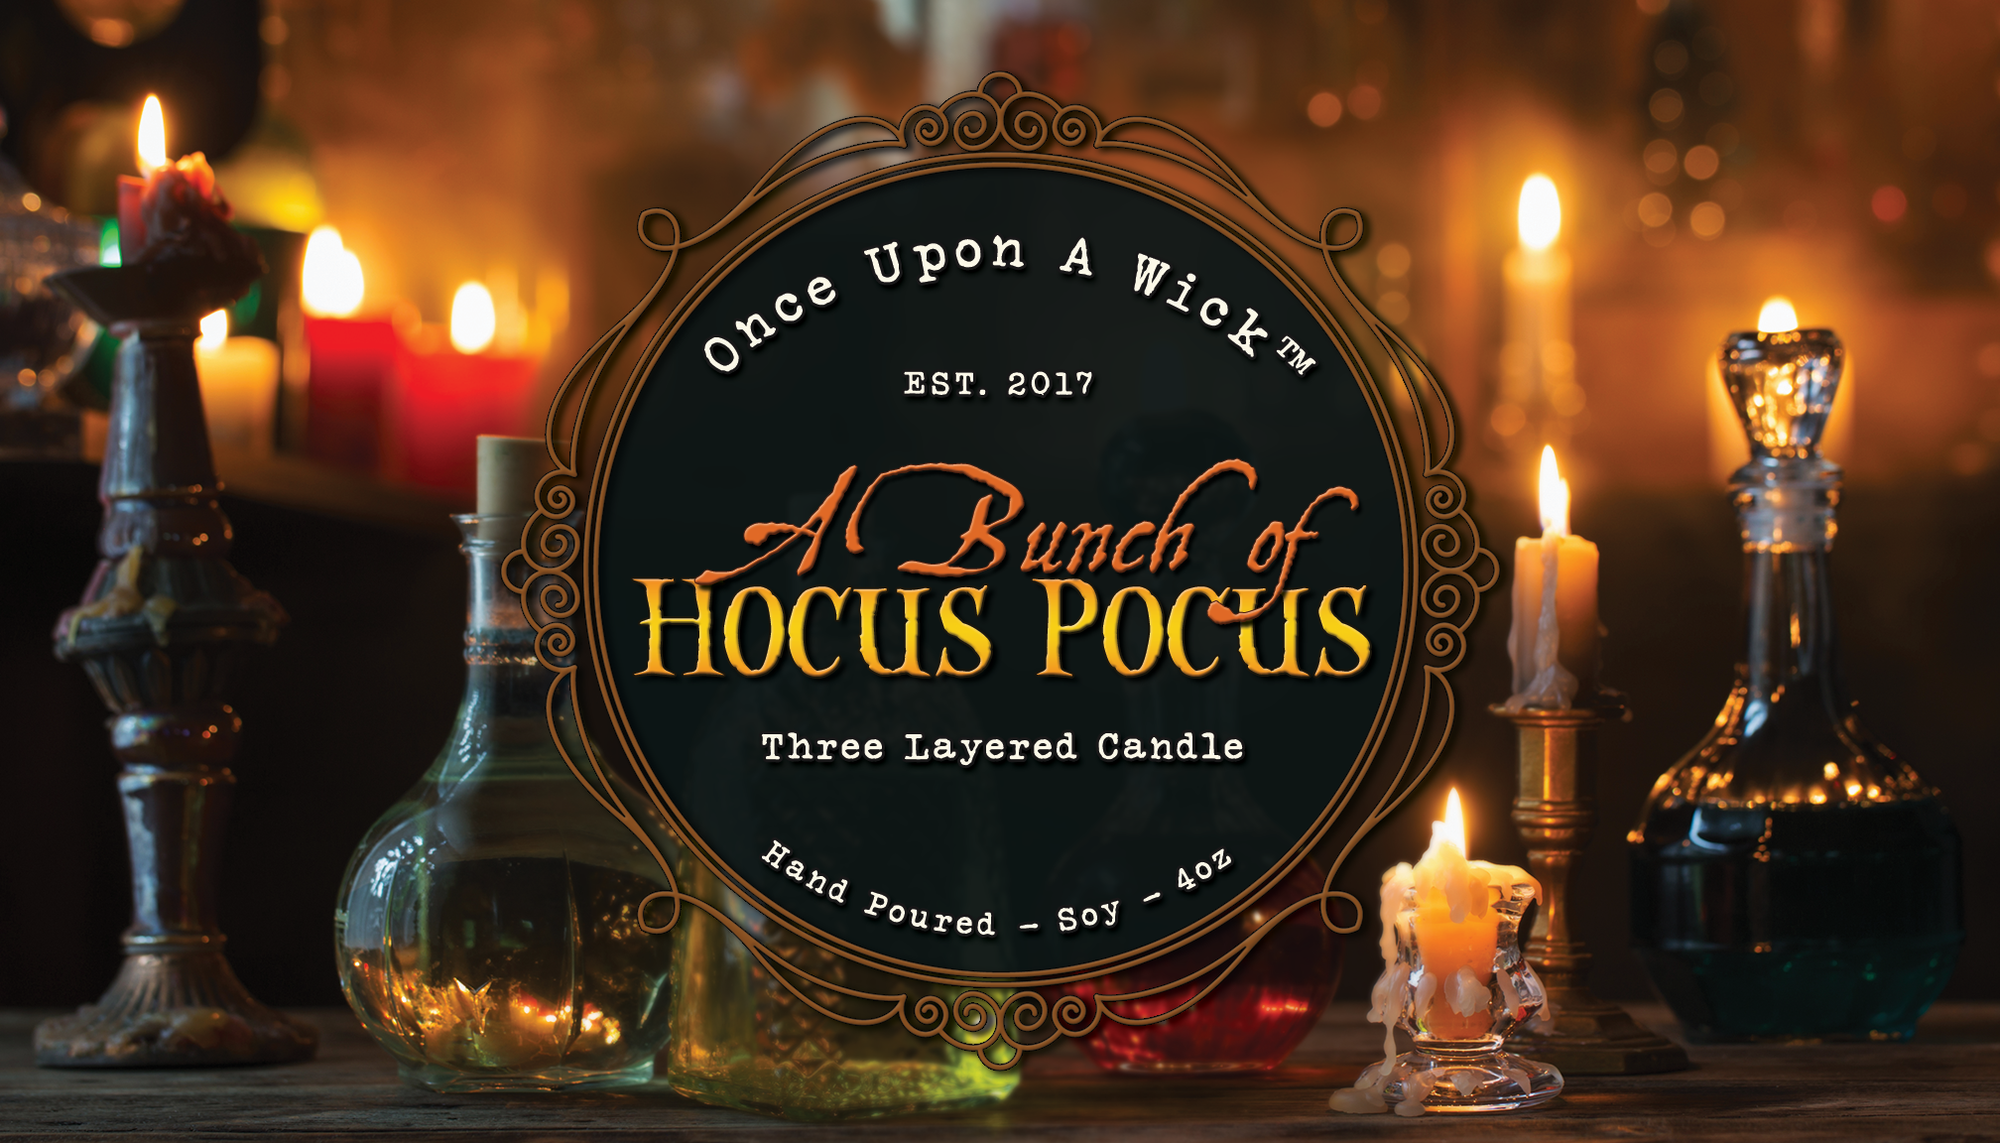 A Bunch of Hocus Pocus | Triple Layered Candle | Hocus Pocus Inspired